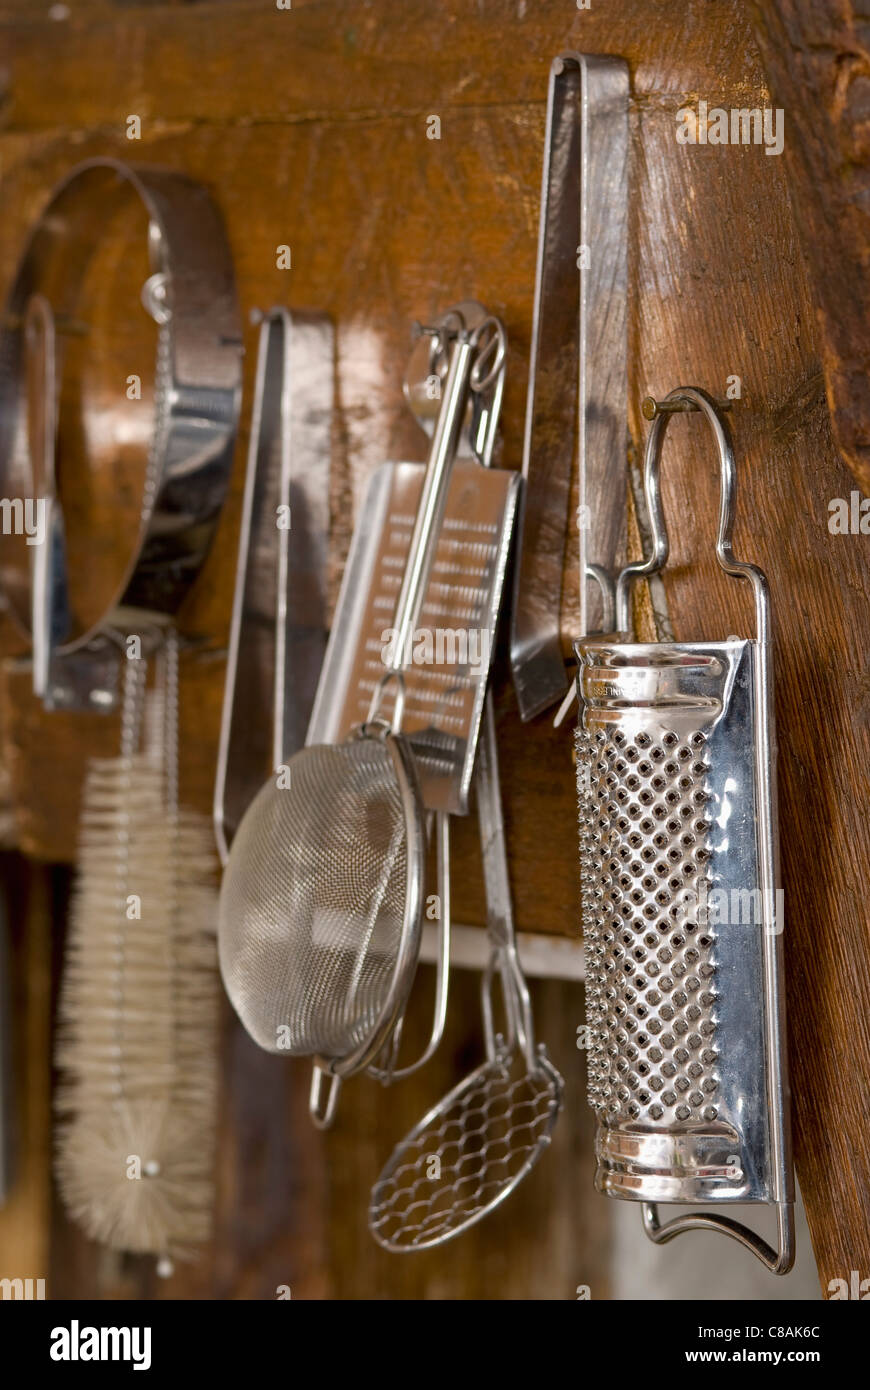 Cooking implements Stock Photo